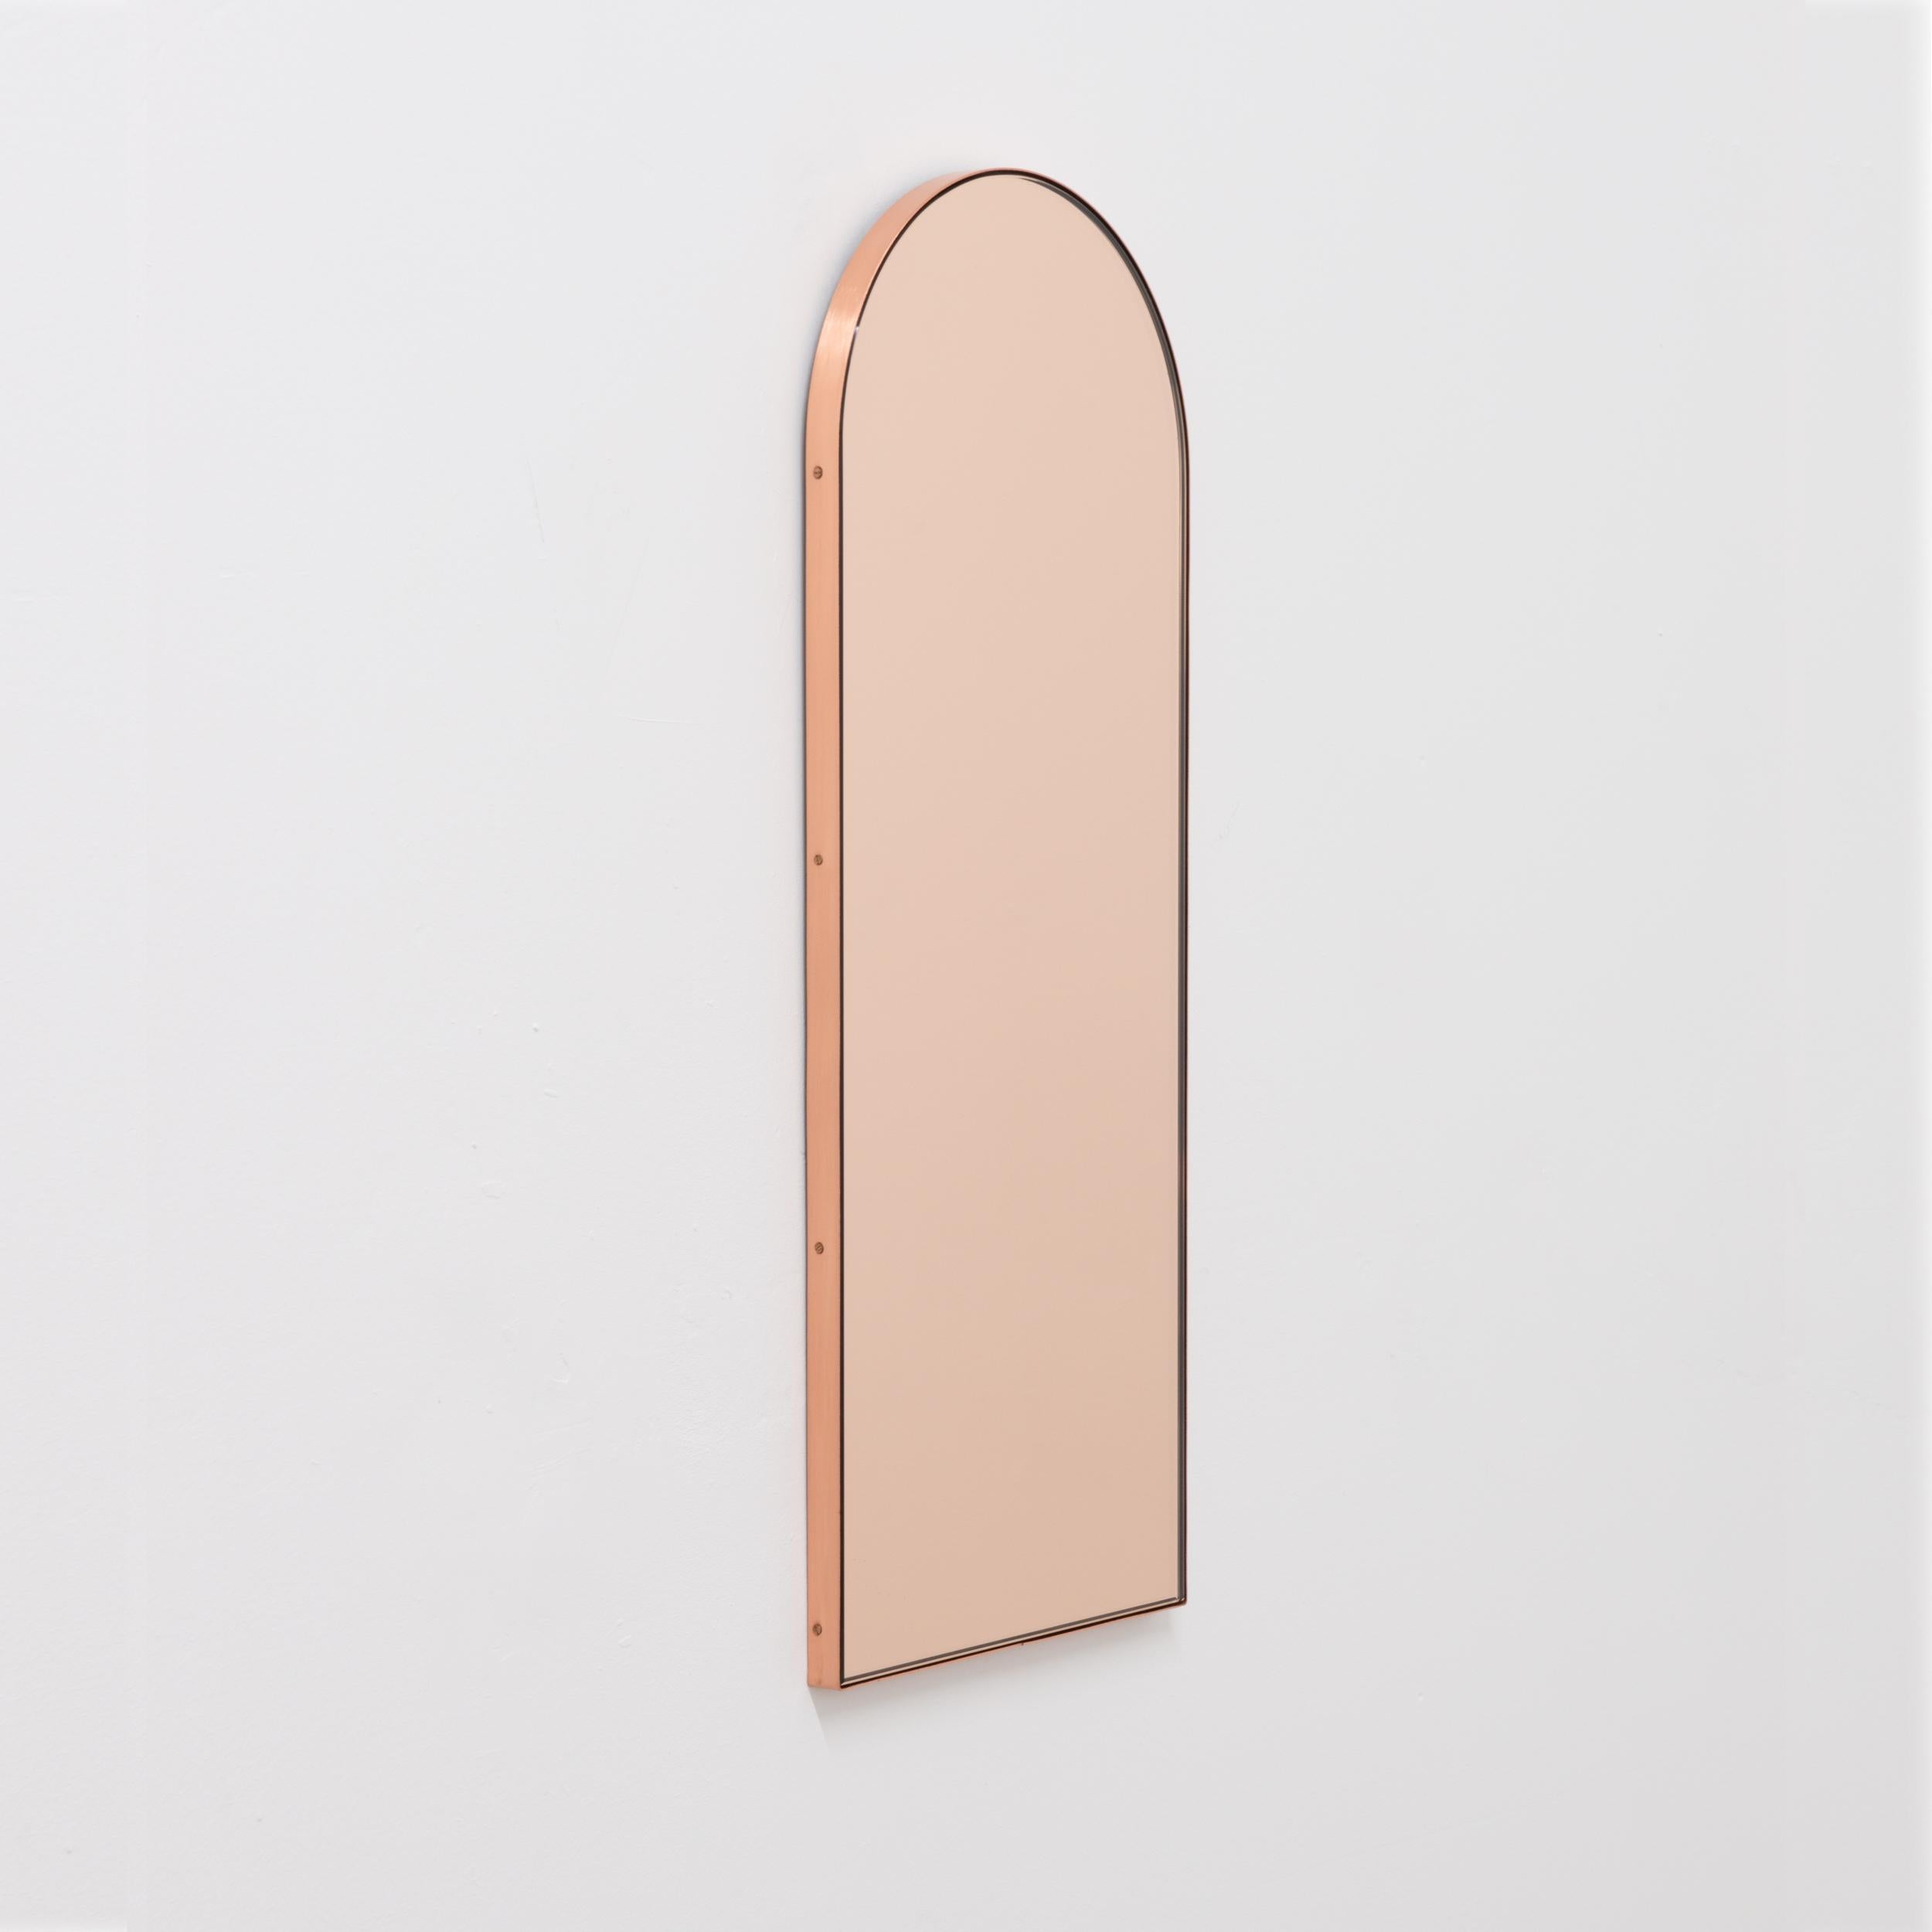 Contemporary arch shaped rose gold / peach mirror with an elegant solid brushed copper frame. Designed and handcrafted in London, UK.

Medium, large and extra-large (37cm x 56cm, 46cm x 71cm and 48cm x 97cm) mirrors are fitted with an ingenious